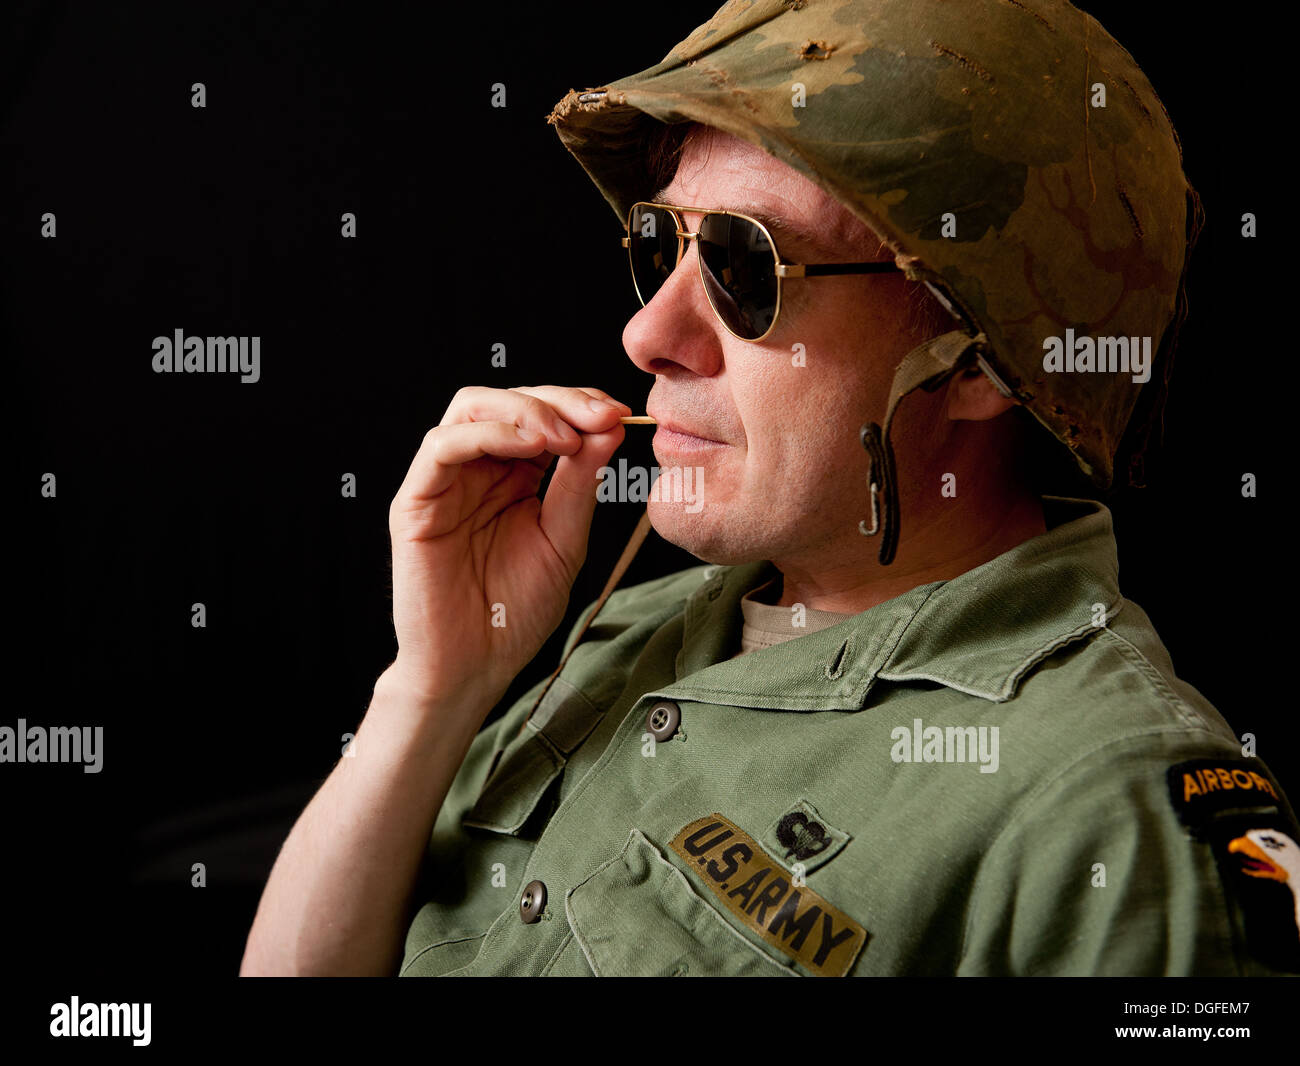 Portrait Of An American Soldier During The Vietnam War Period Wearing Dark Sunglasses And